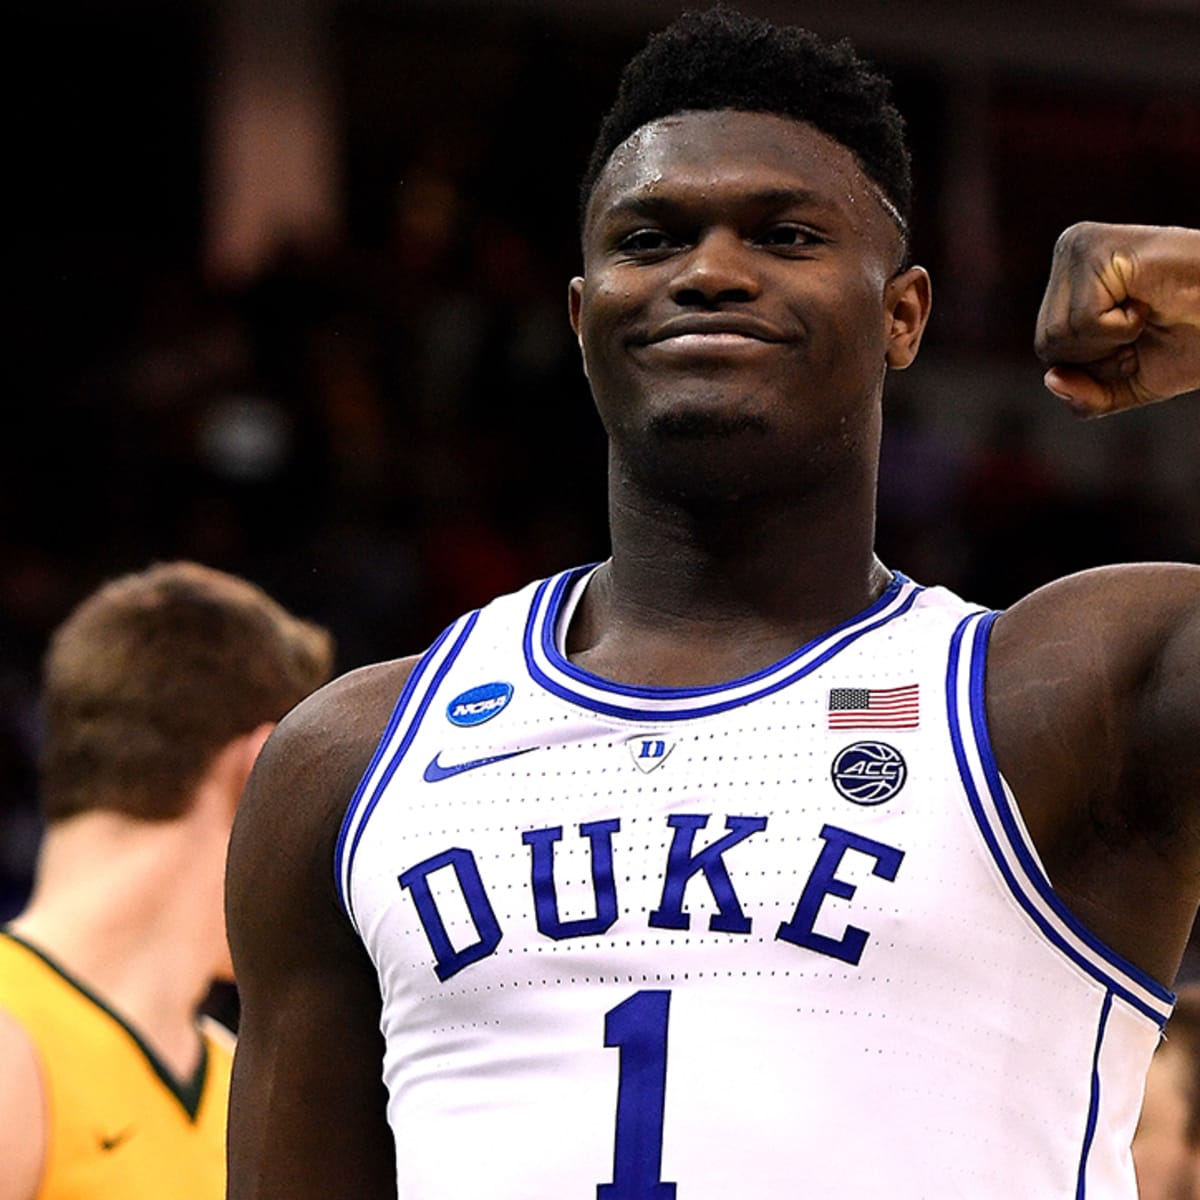 Fantasy Basketball PF Exit Interview: Is drafting Zion Williamson